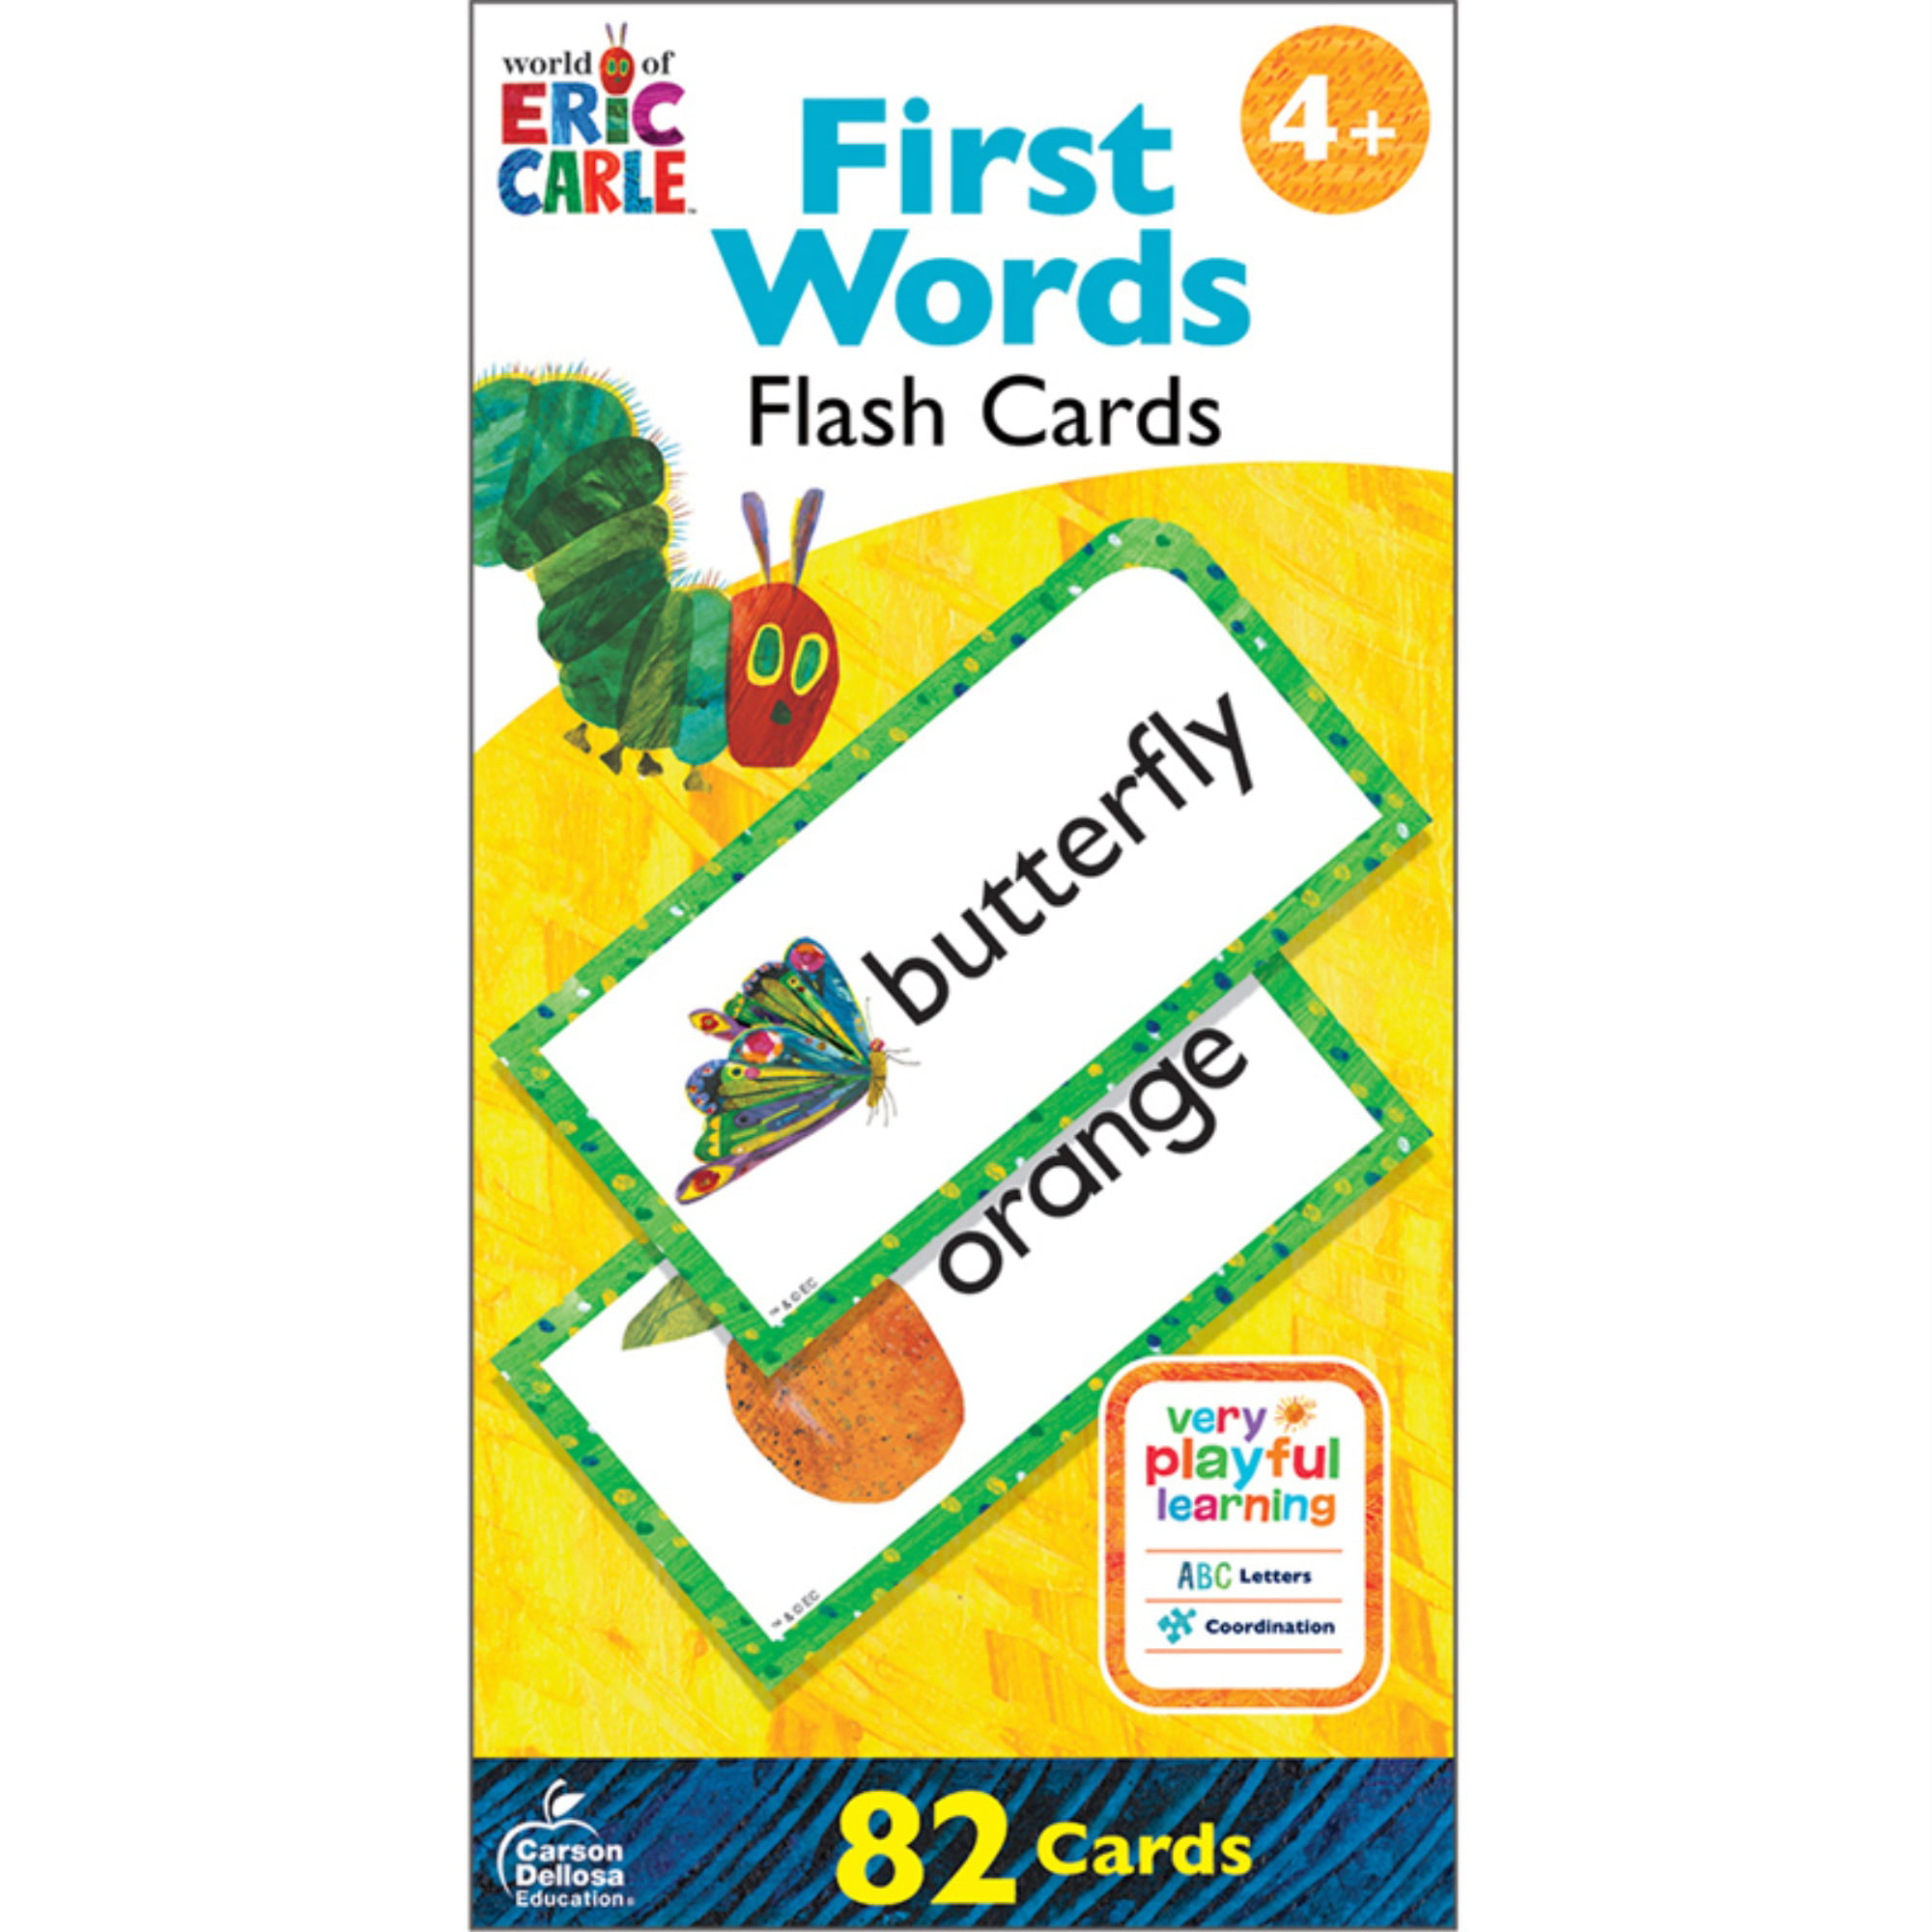 World of Eric Carle Flash Cards Bundle ~ ABC Numbers Shapes Colors and 